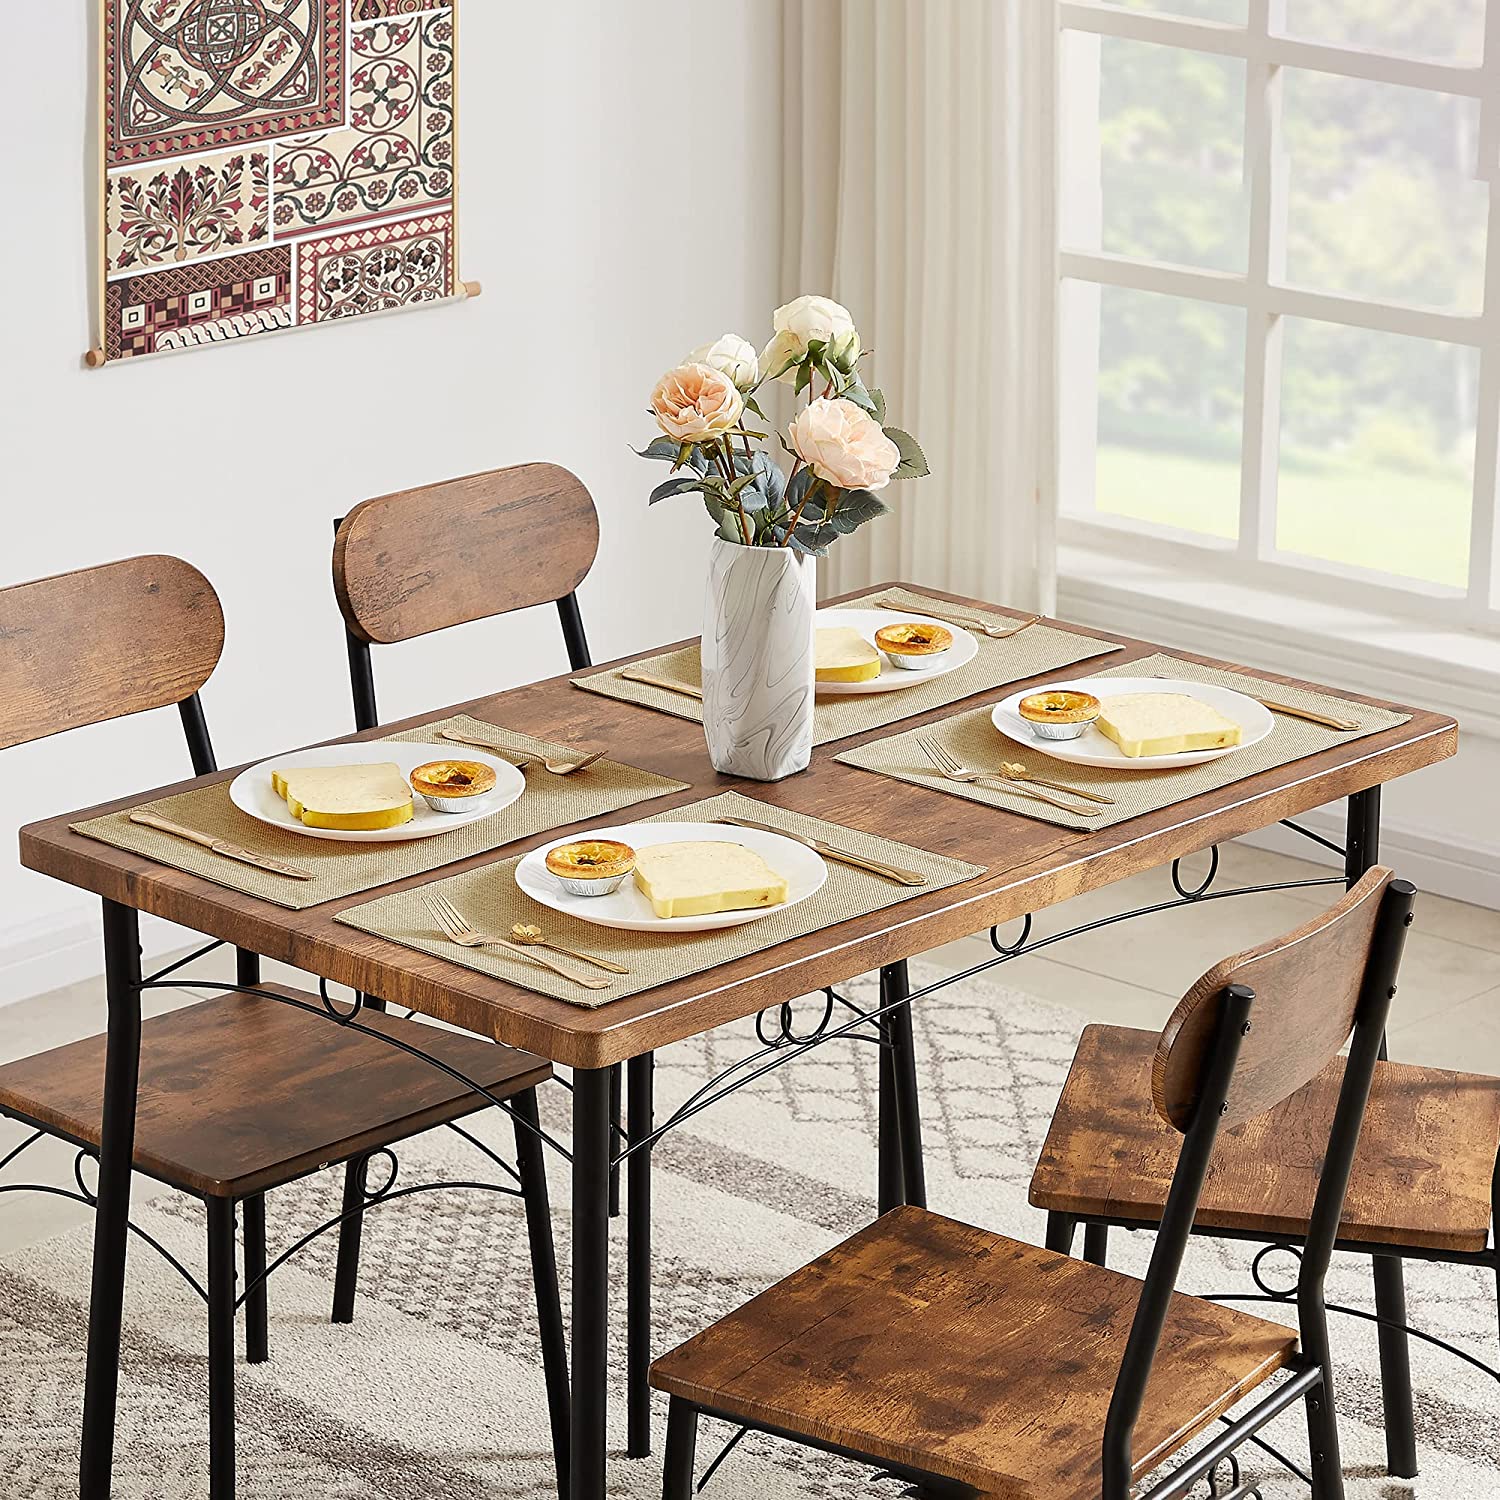 VECELO  Farmhouse Style 5 Piece Dining Table Set Metal and Wood Rectangular Table with 4 Chairs